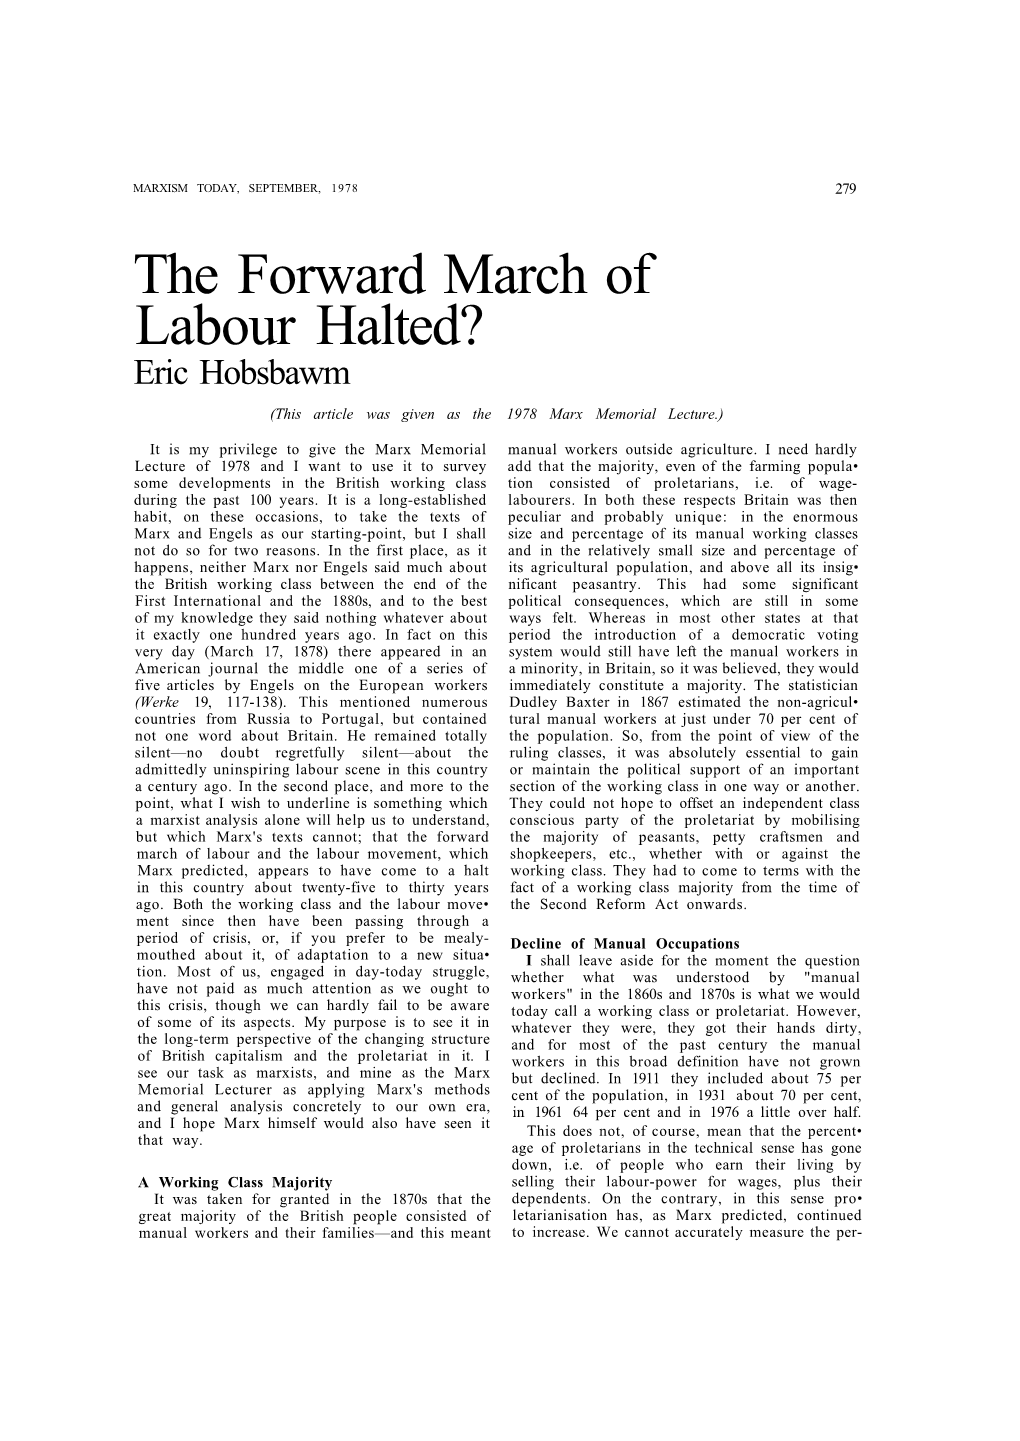 The Forward March of Labour Halted? Eric Hobsbawm (This Article Was Given As the 1978 Marx Memorial Lecture.)